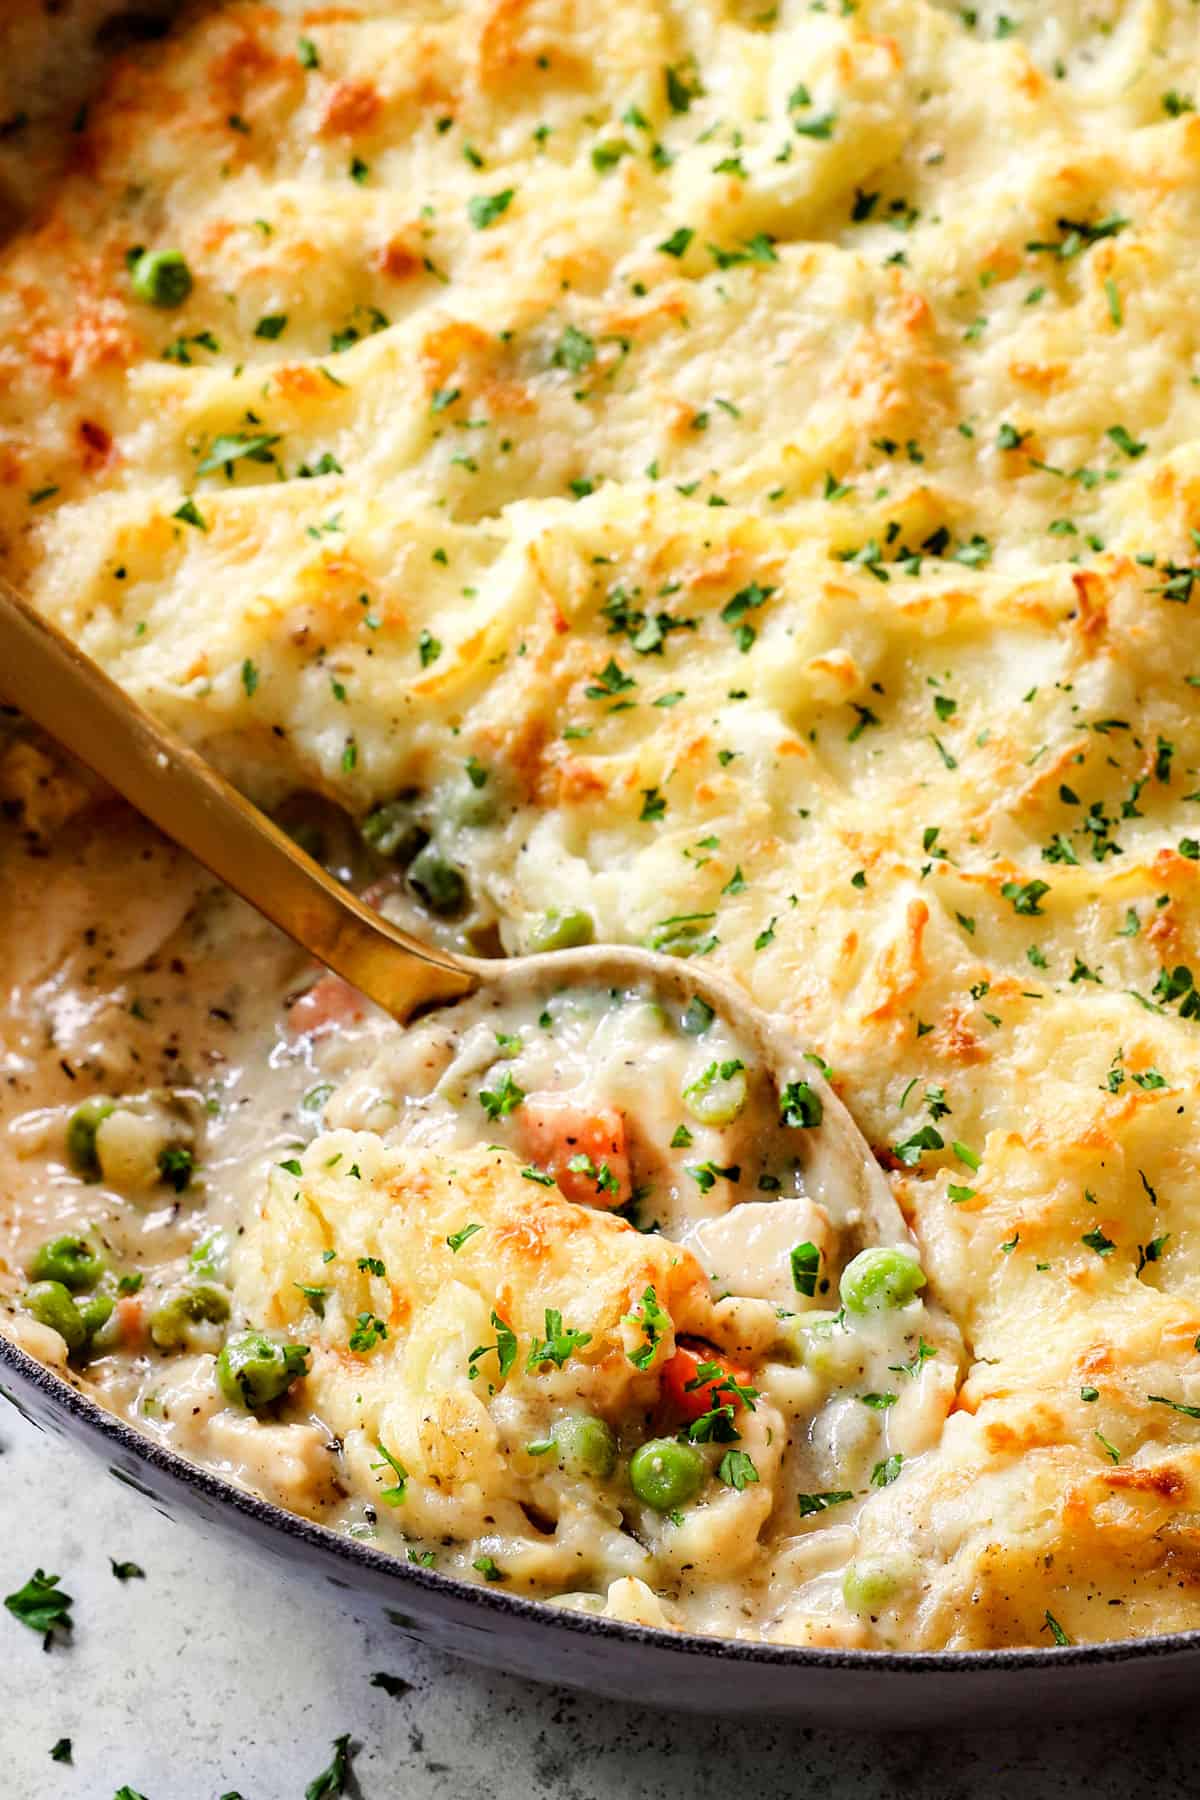 up close of turkey shepherd's pie showing the creamy filling